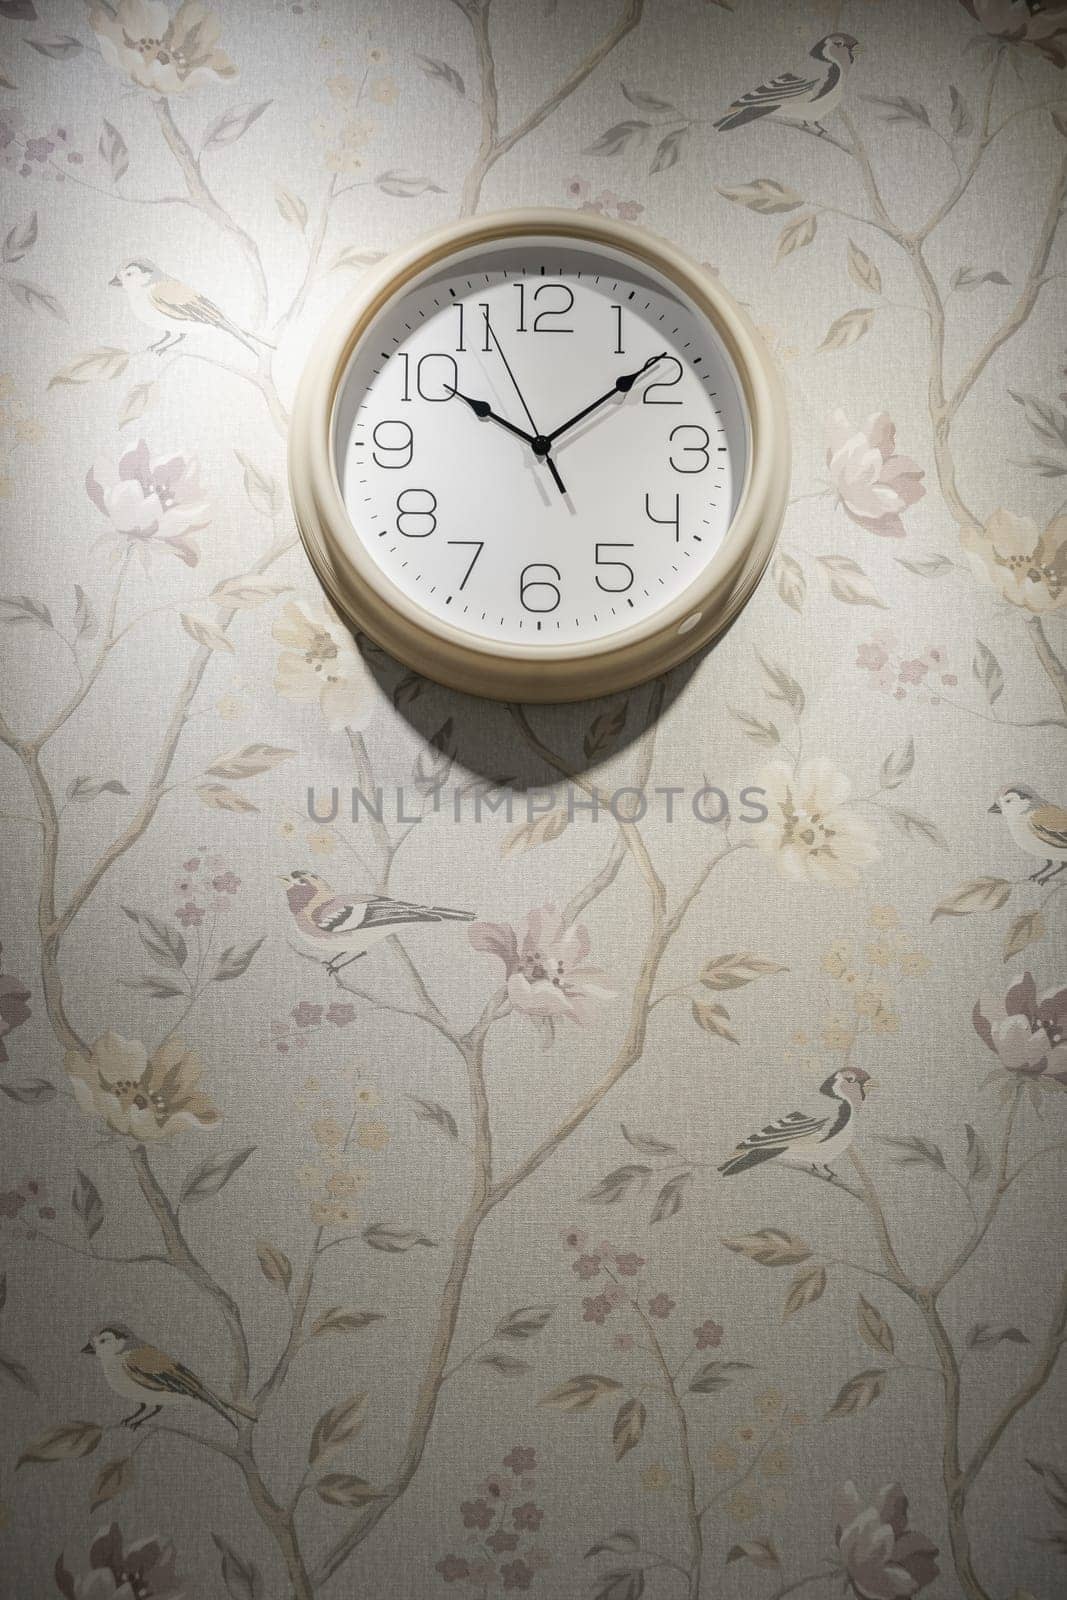 A round clock on the wall indicates the exact time. decor in the room by AnatoliiFoto